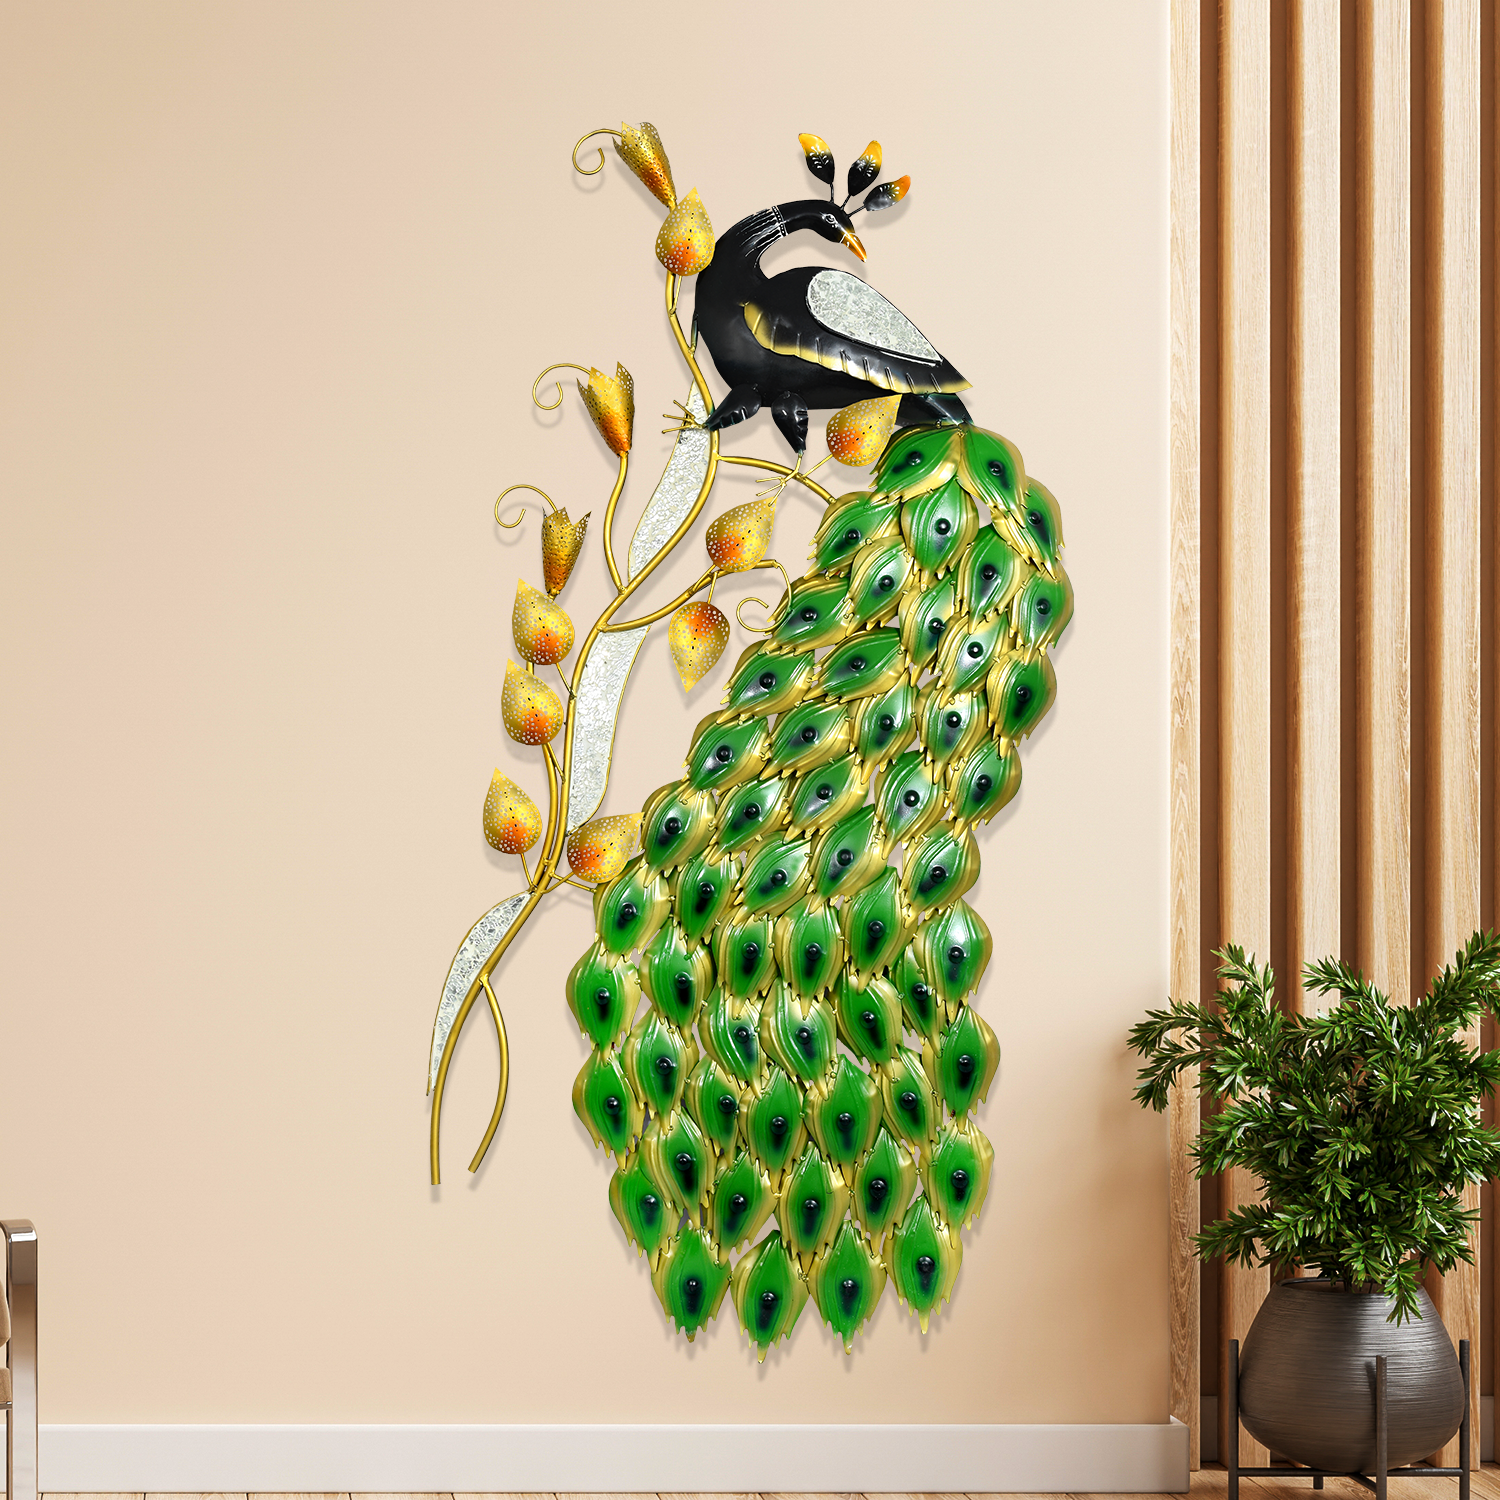 4ft Metal Peacock Wall Art With LED